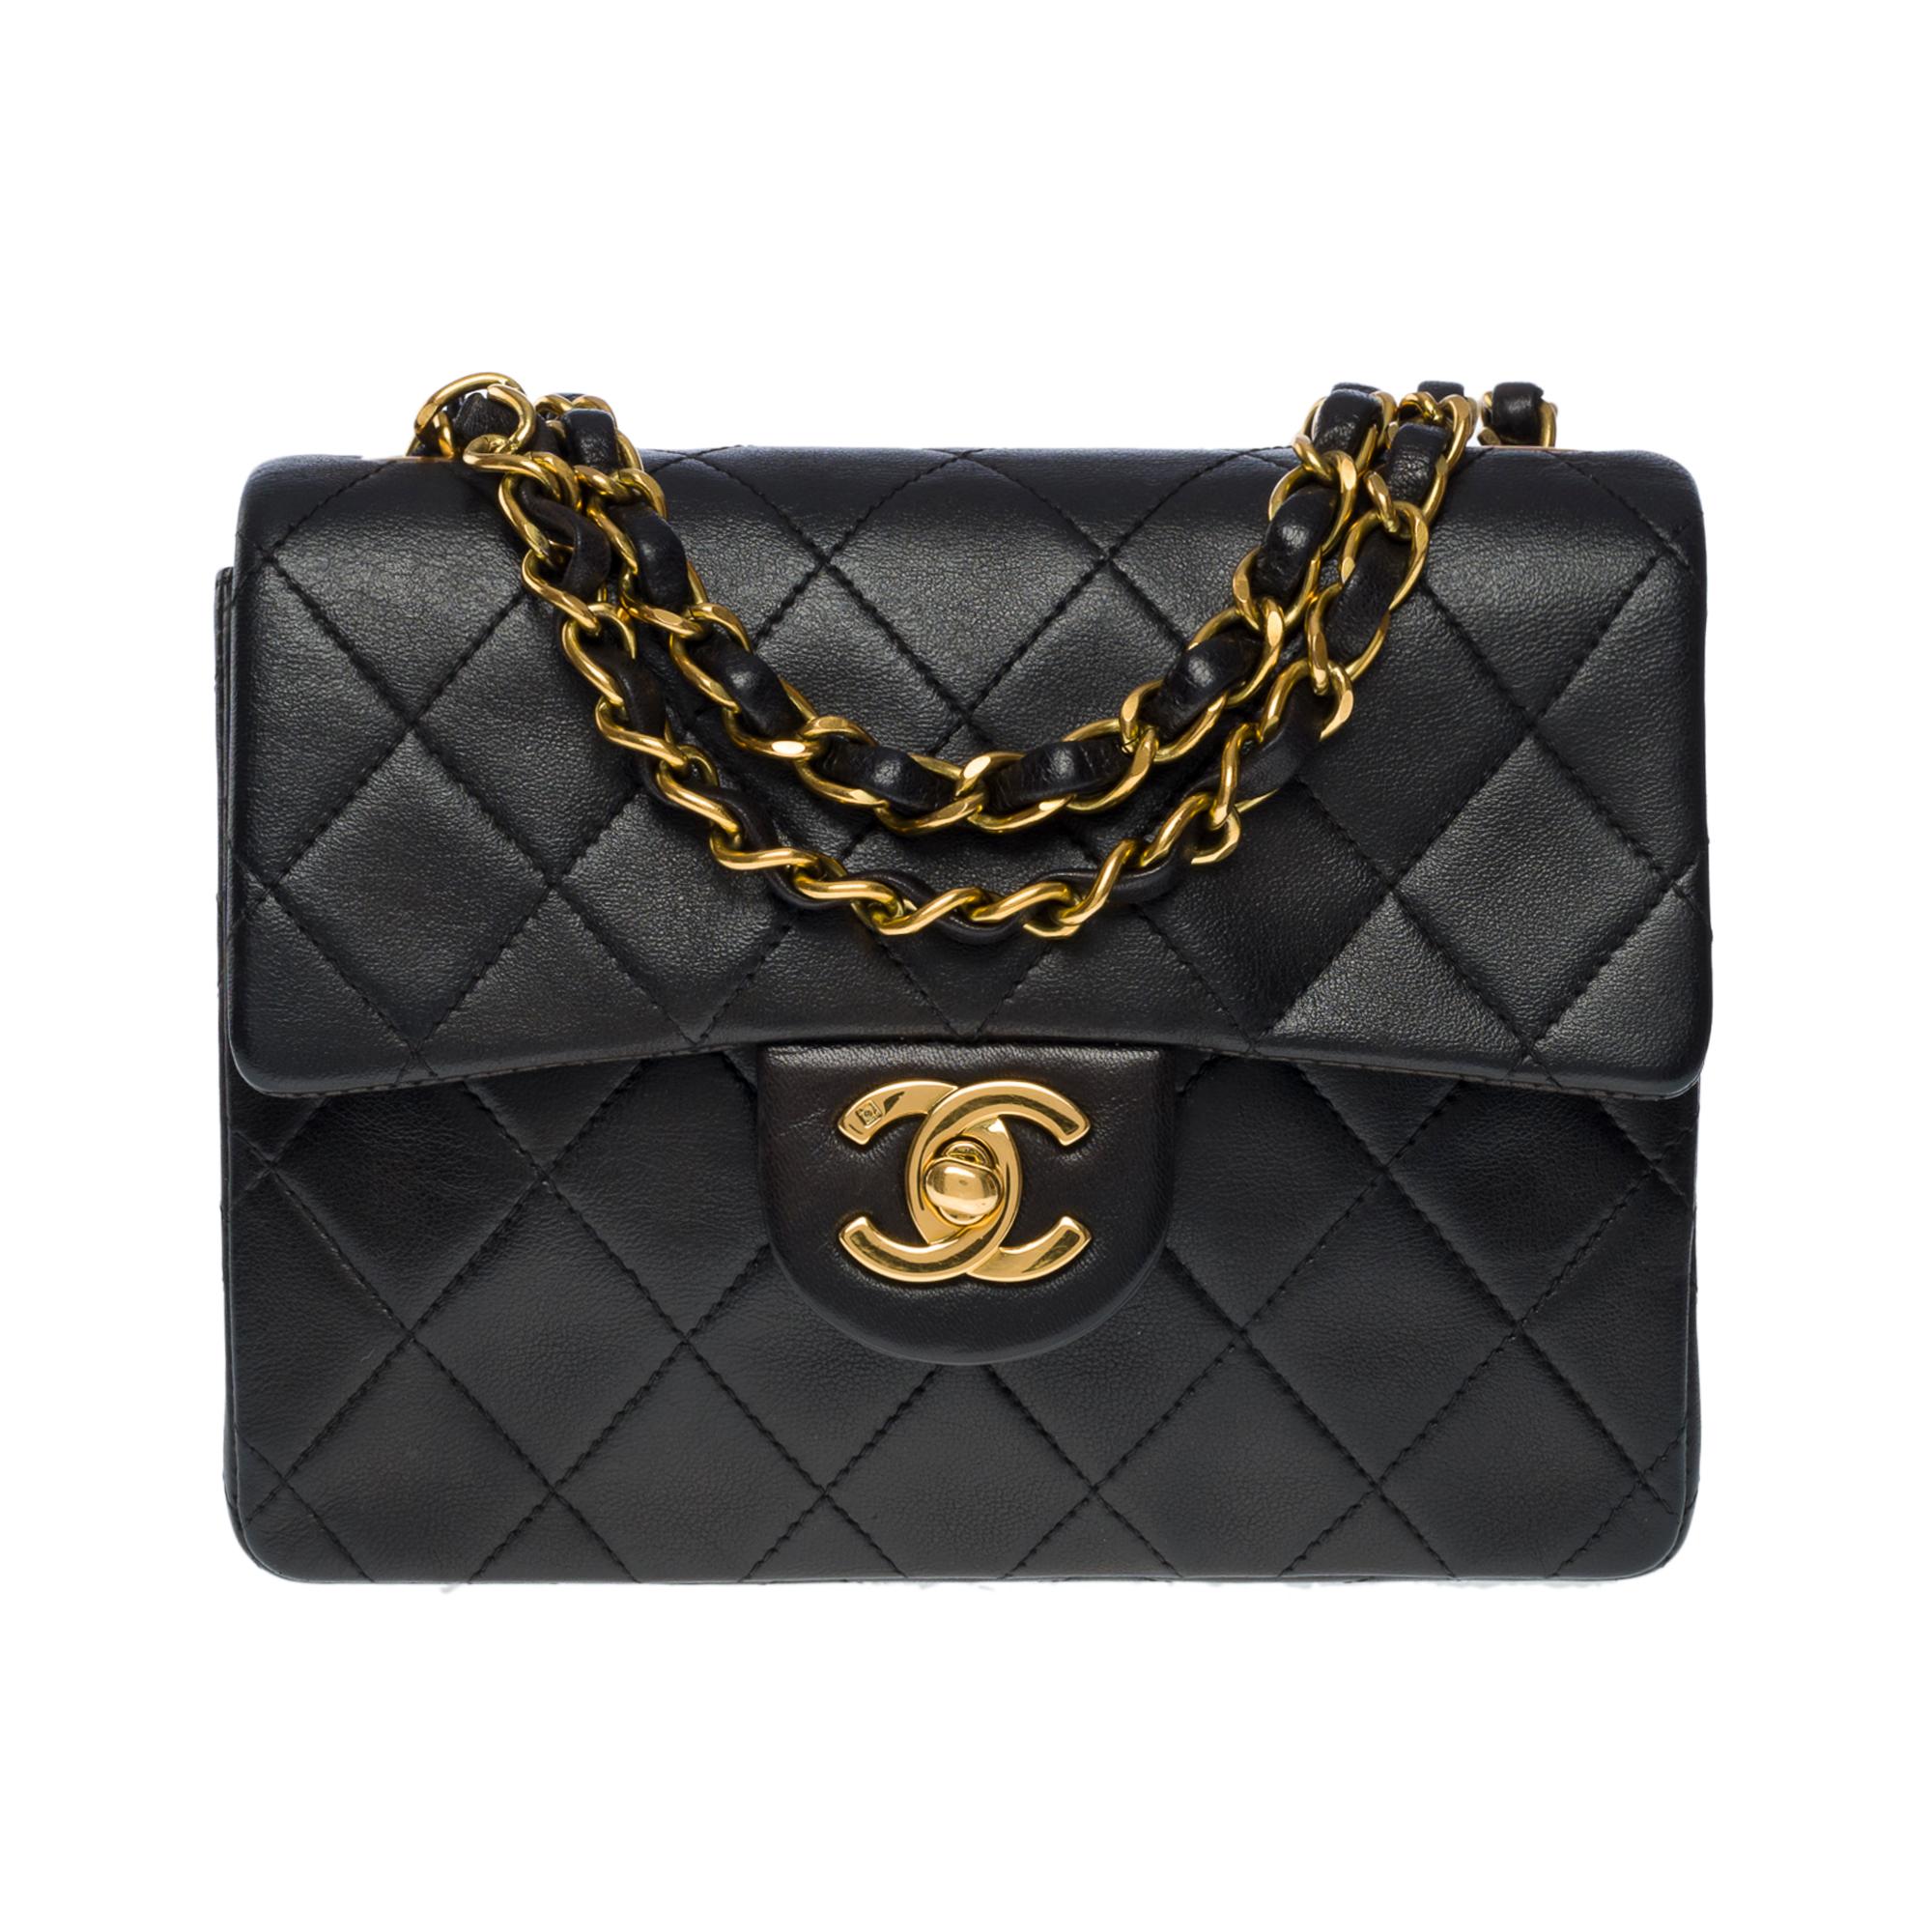 Gorgeous Chanel Mini Timeless Square shoulder flap bag in black quilted lambskin leather, shoulder strap in gold metal interlaced with black lambskin for a hand-on, shoulder or crossbody carry
Flap closure and gold metal turnstile closure
Burgundy